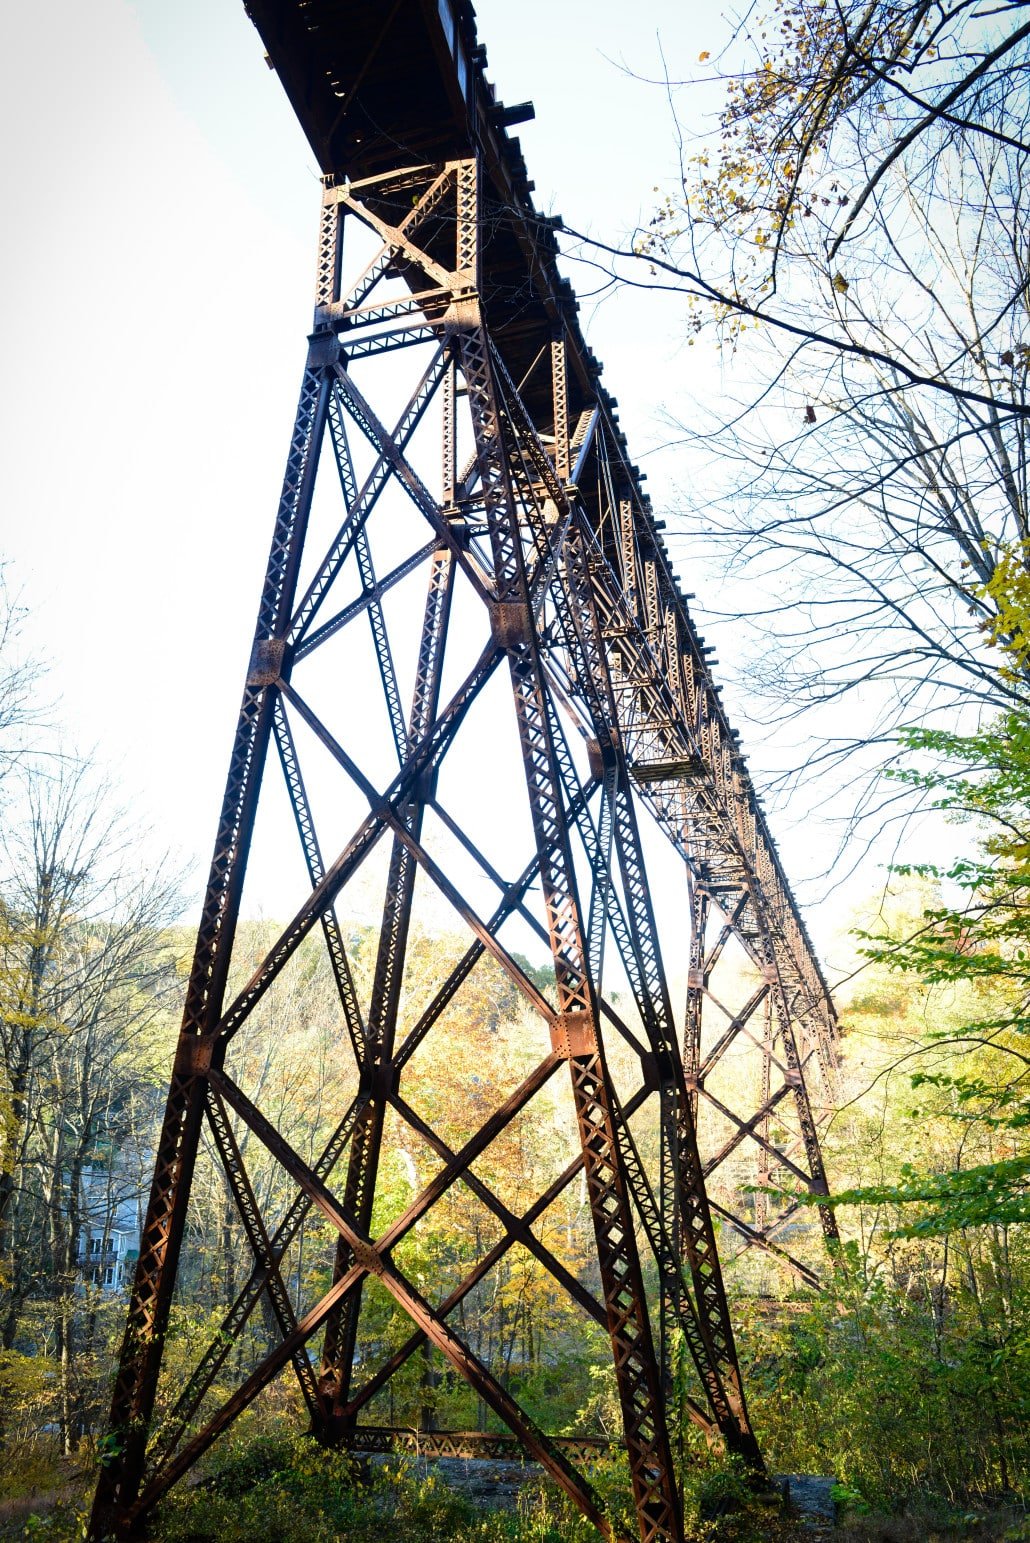 The Rosendale Trestle, formerly a railroad bridge, spans 940 feet across and 150 feet above Rondout Creek and Rt 213